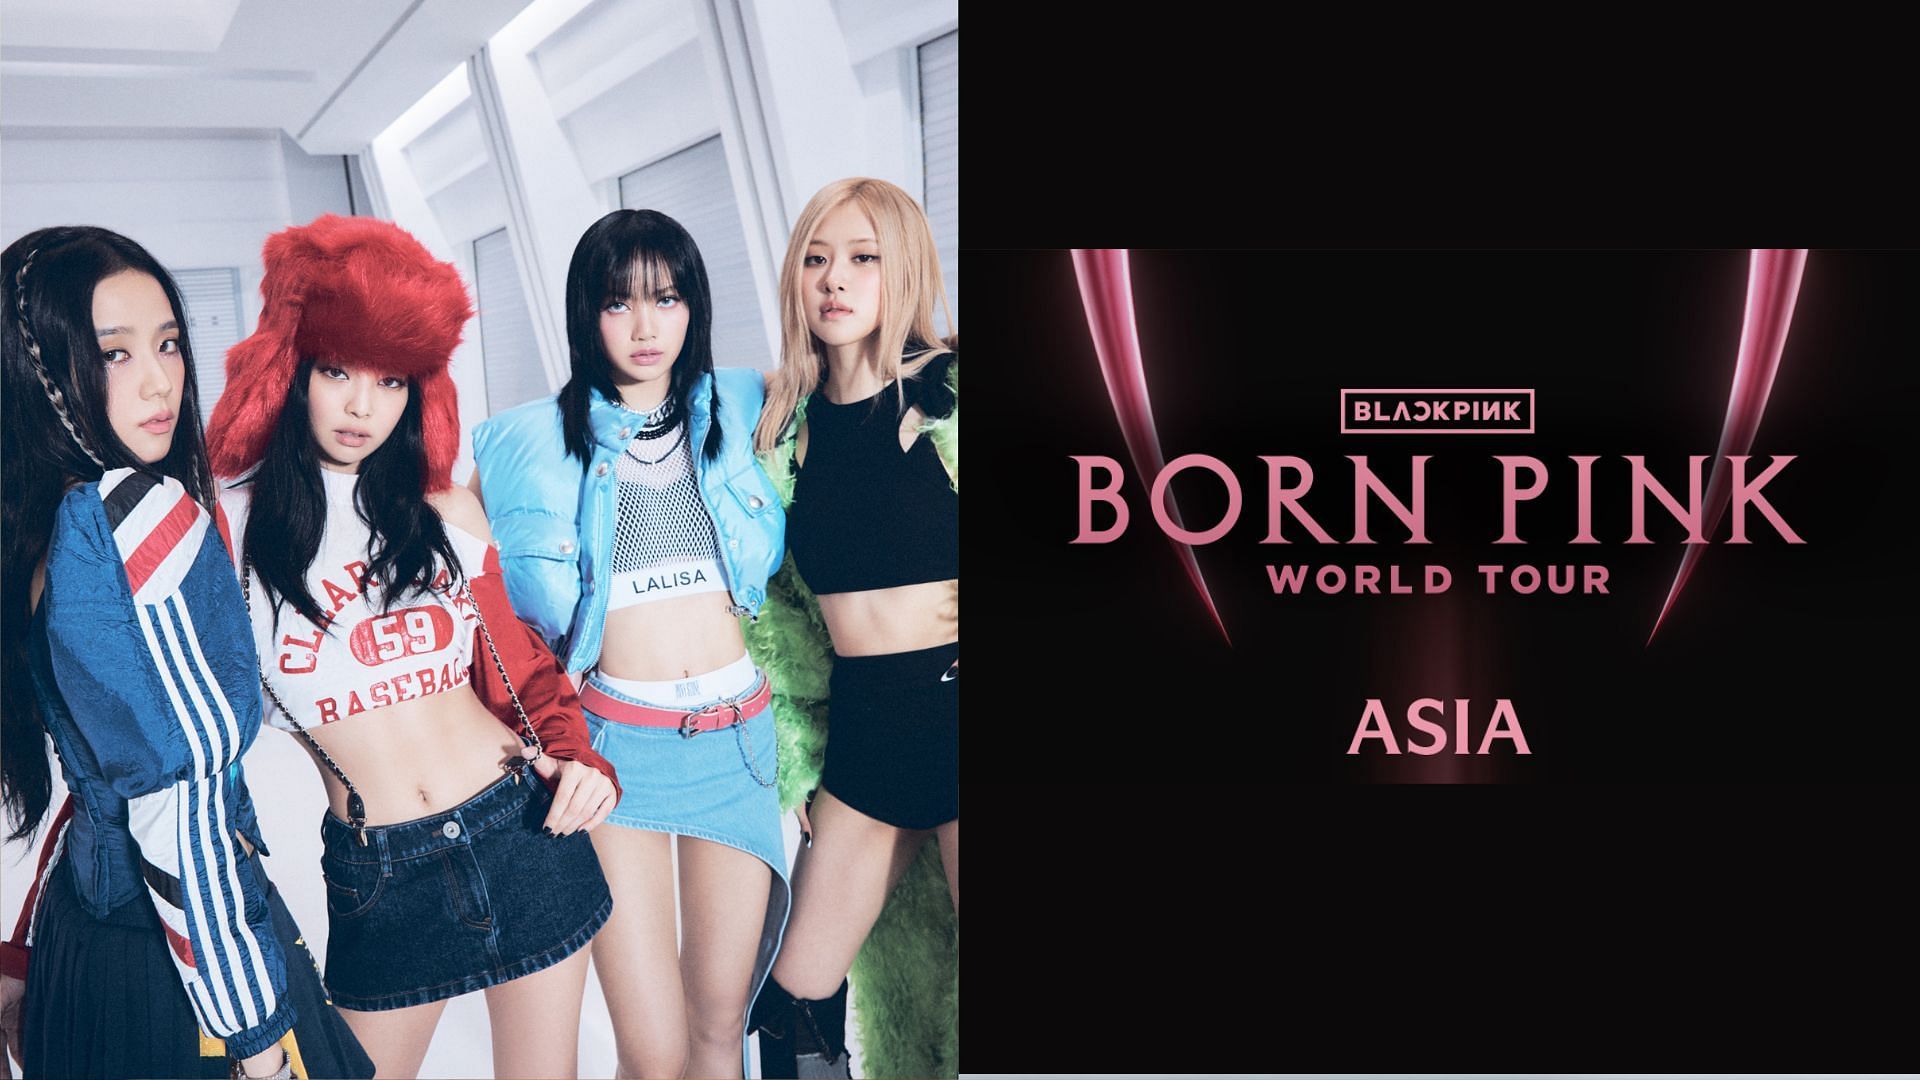 Blackpink's best fashion looks during the Born Pink World Tour